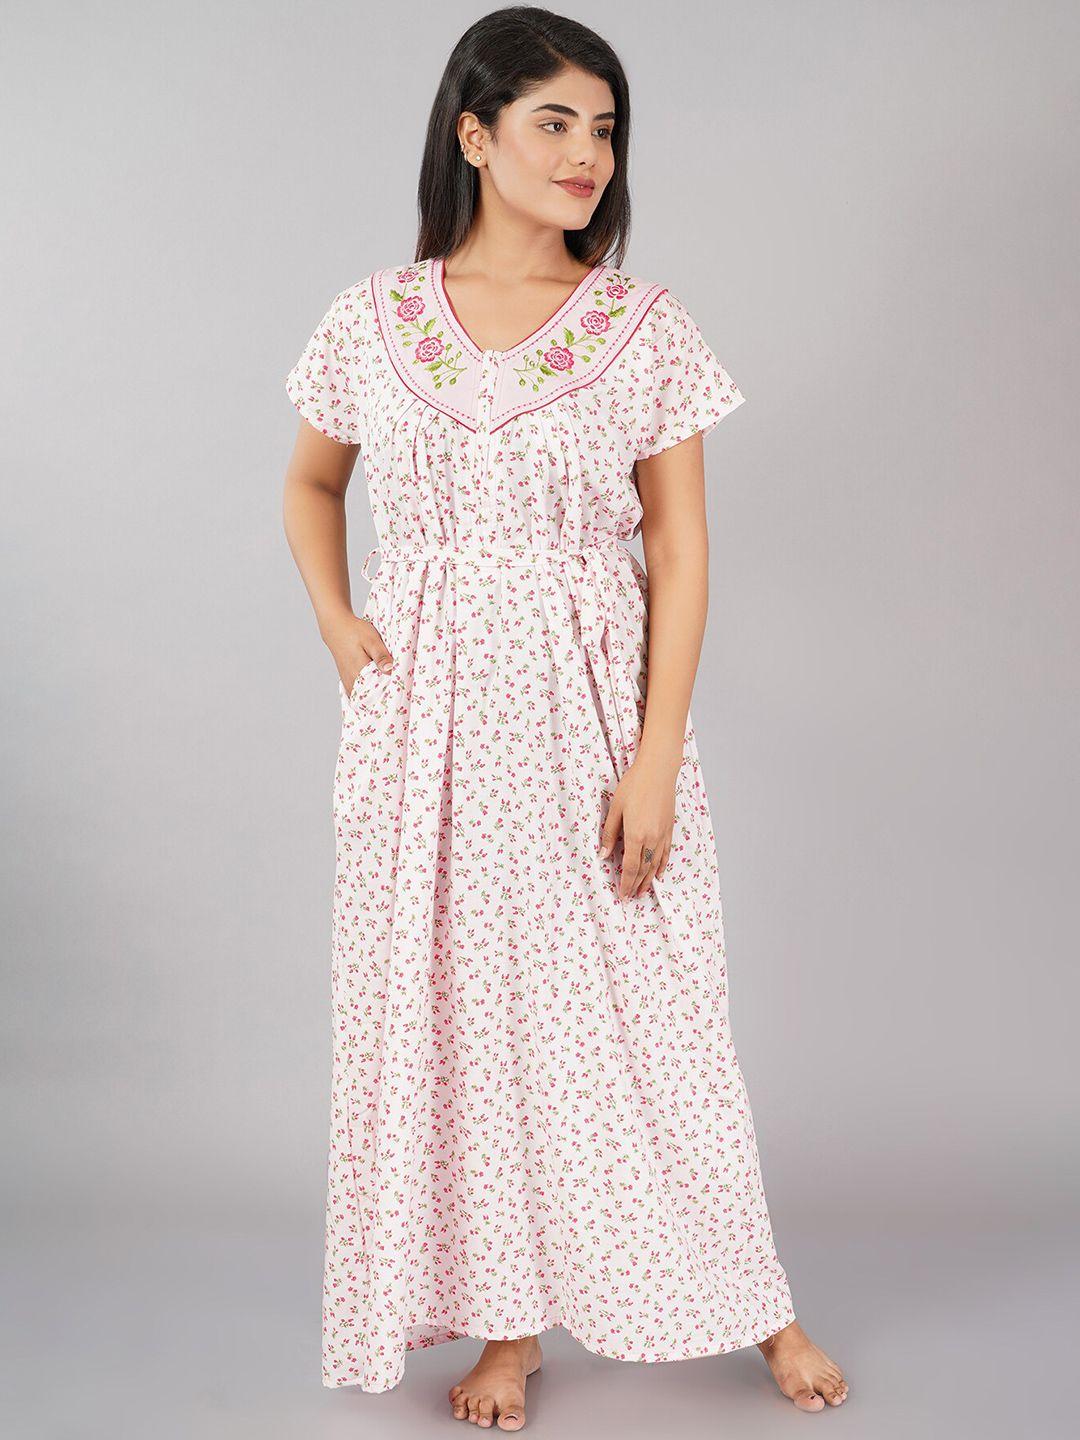 noty floral printed pure cotton maxi nightdress